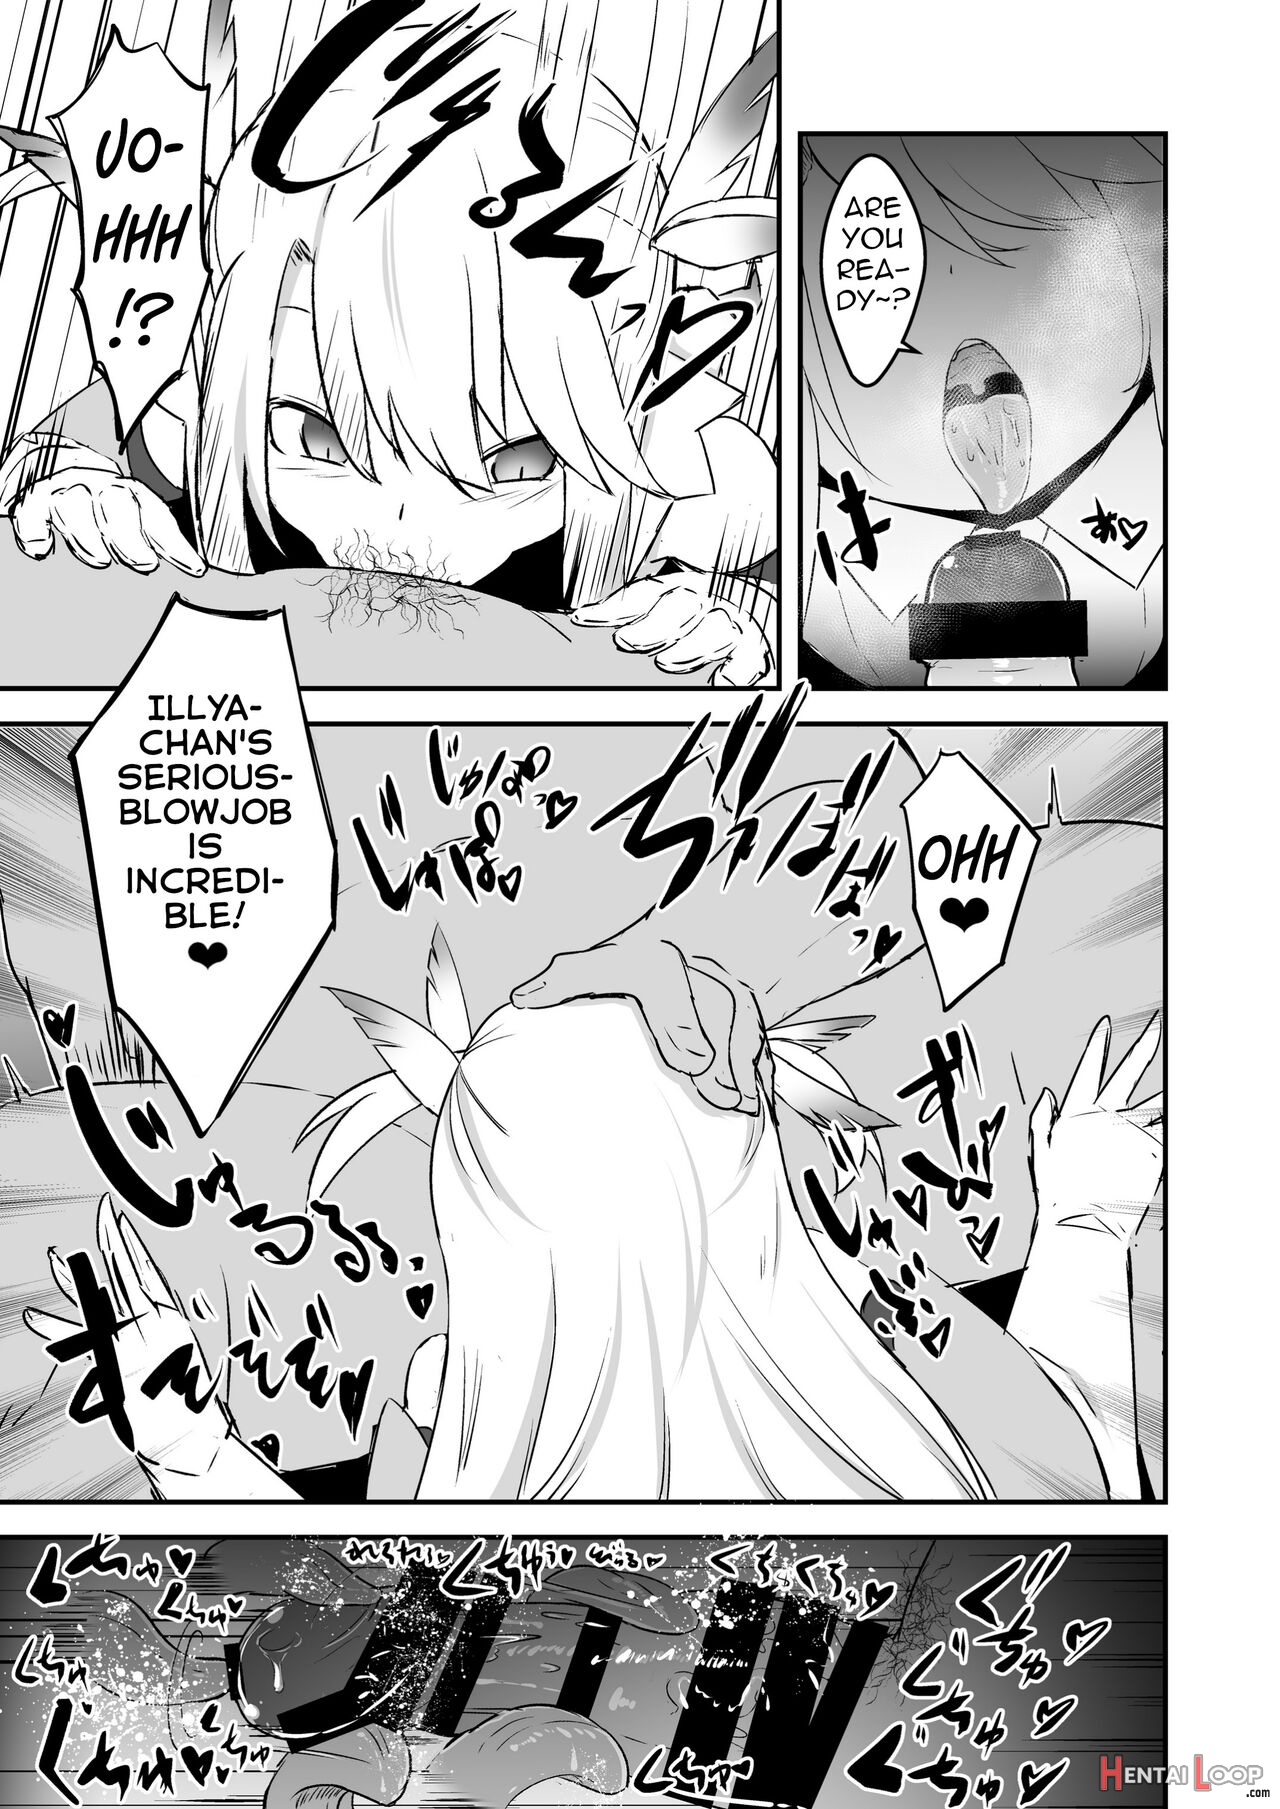 Doing Lewd Things With Oji-san page 6